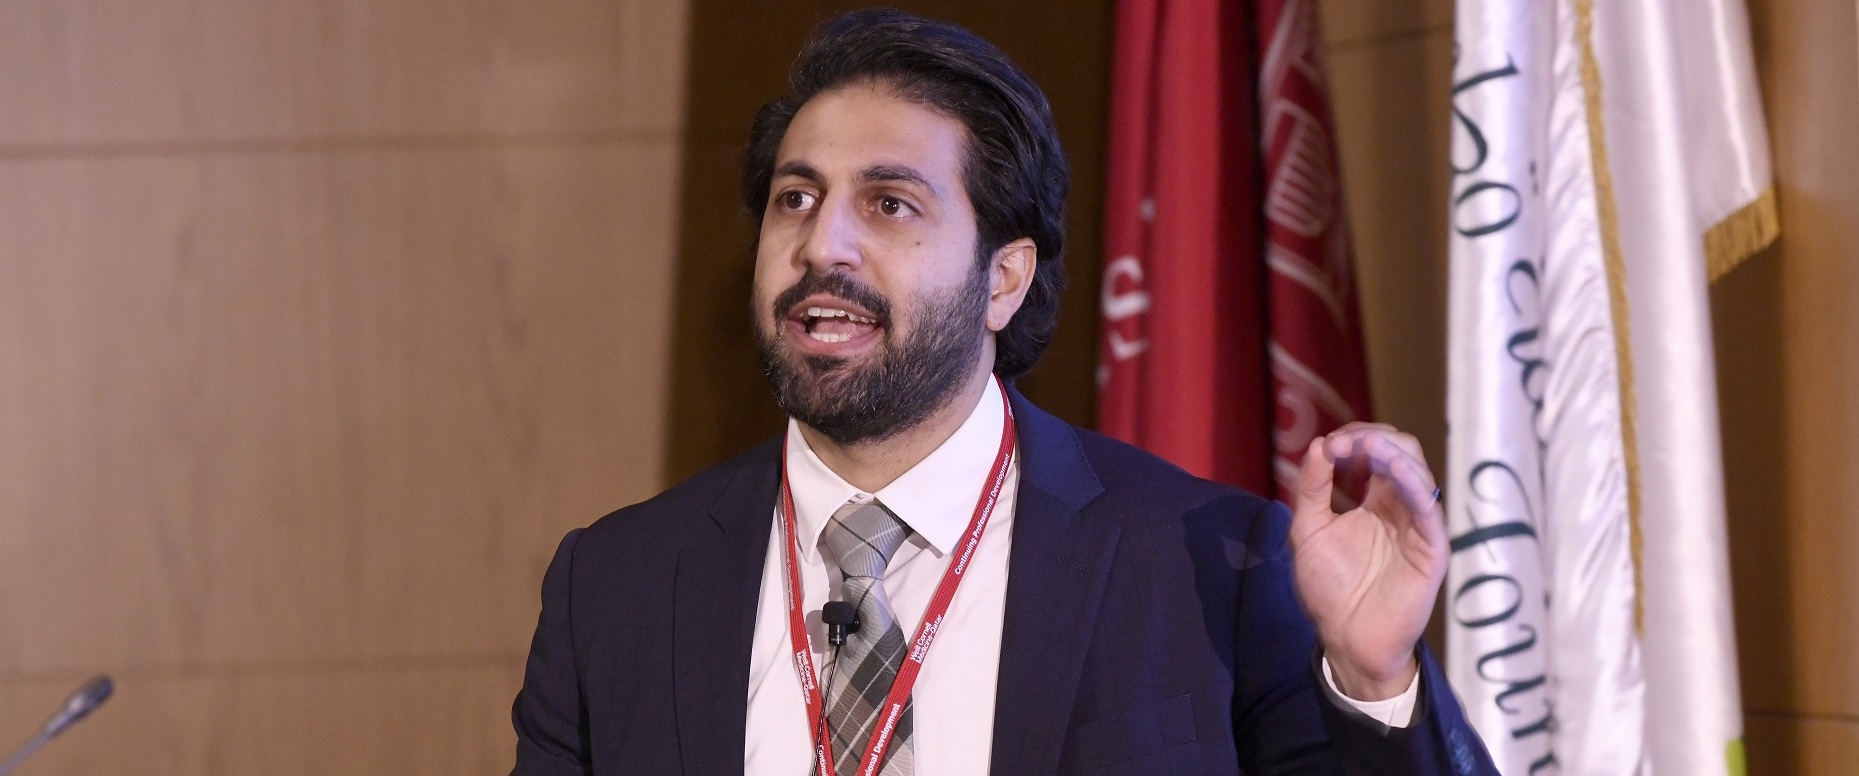 Dr. Mohamed B. Elshazly, Cardiologist and Assistant Professor of Medicine at WCM-Q, spoke about the potential for wearable technology to improve healthcare outcomes.